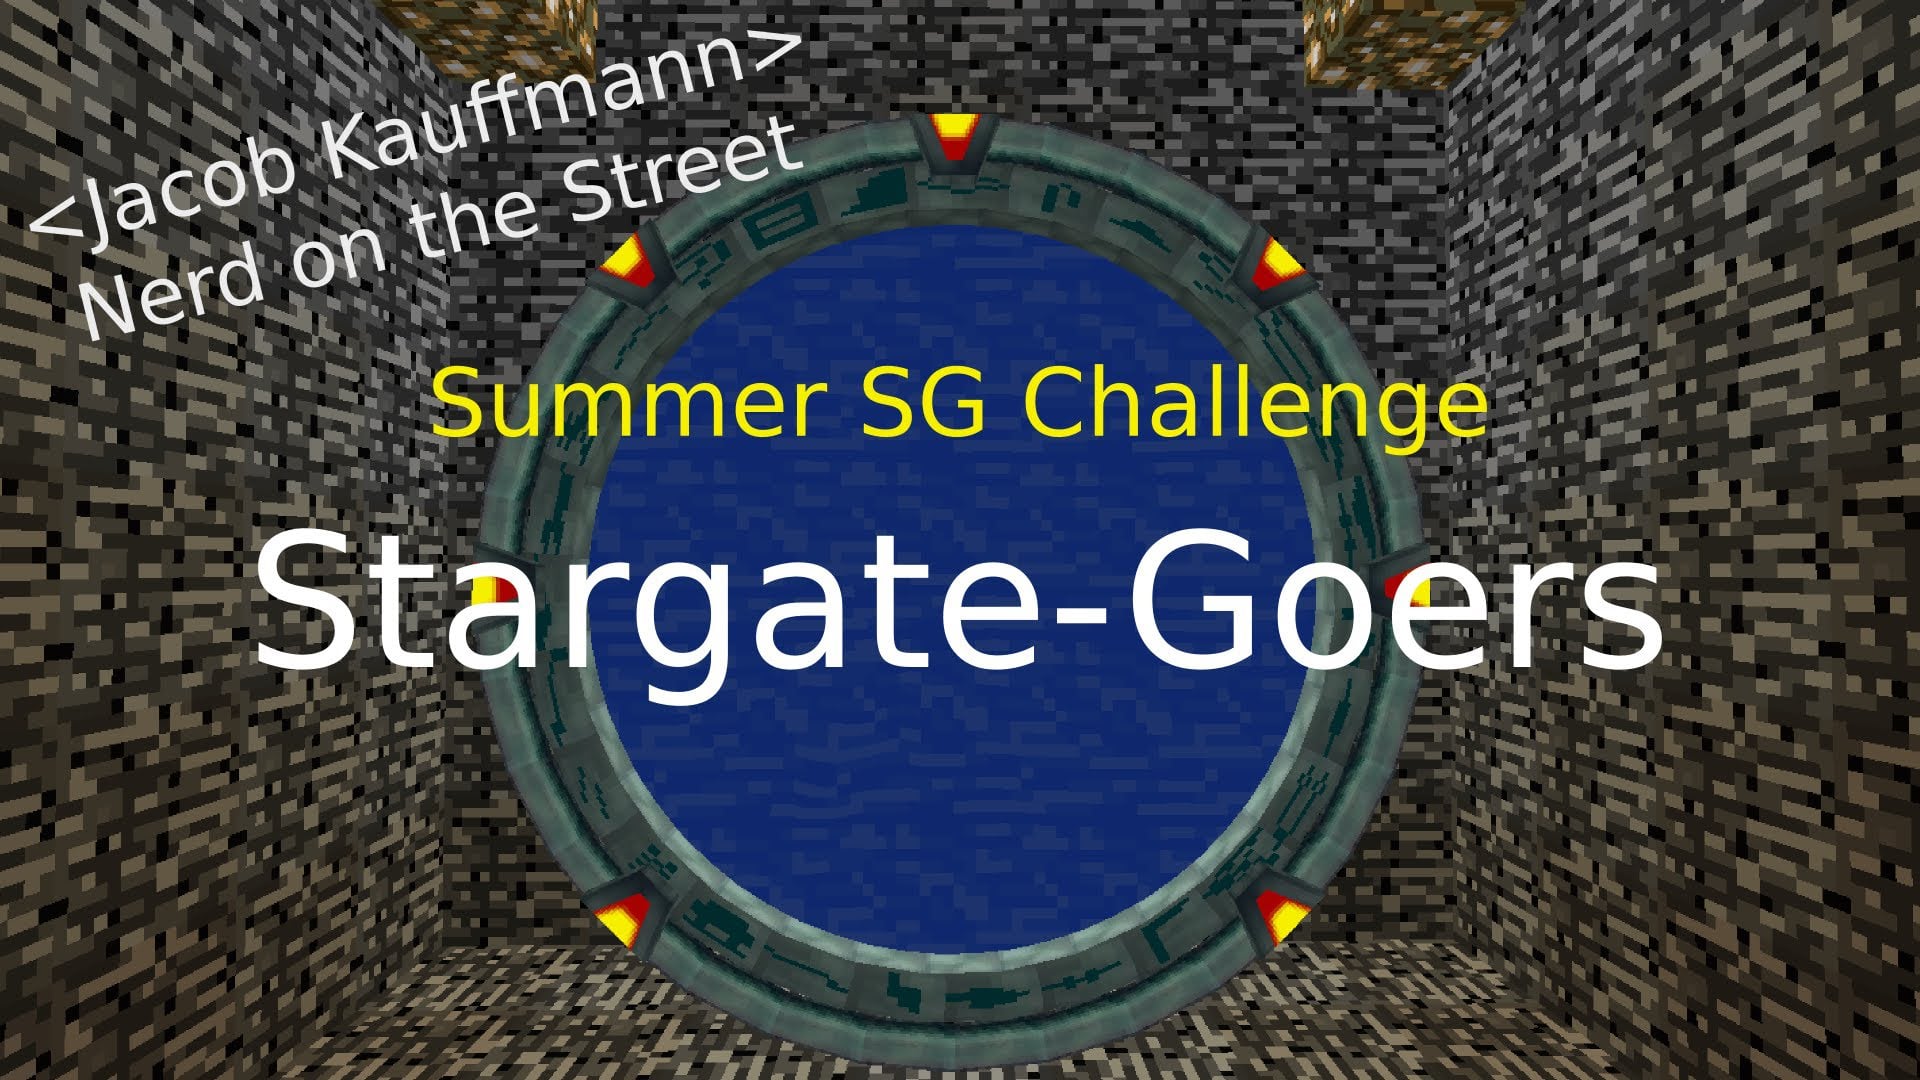 Stargate-Goers Competitive Summary - Summer SG Challenge